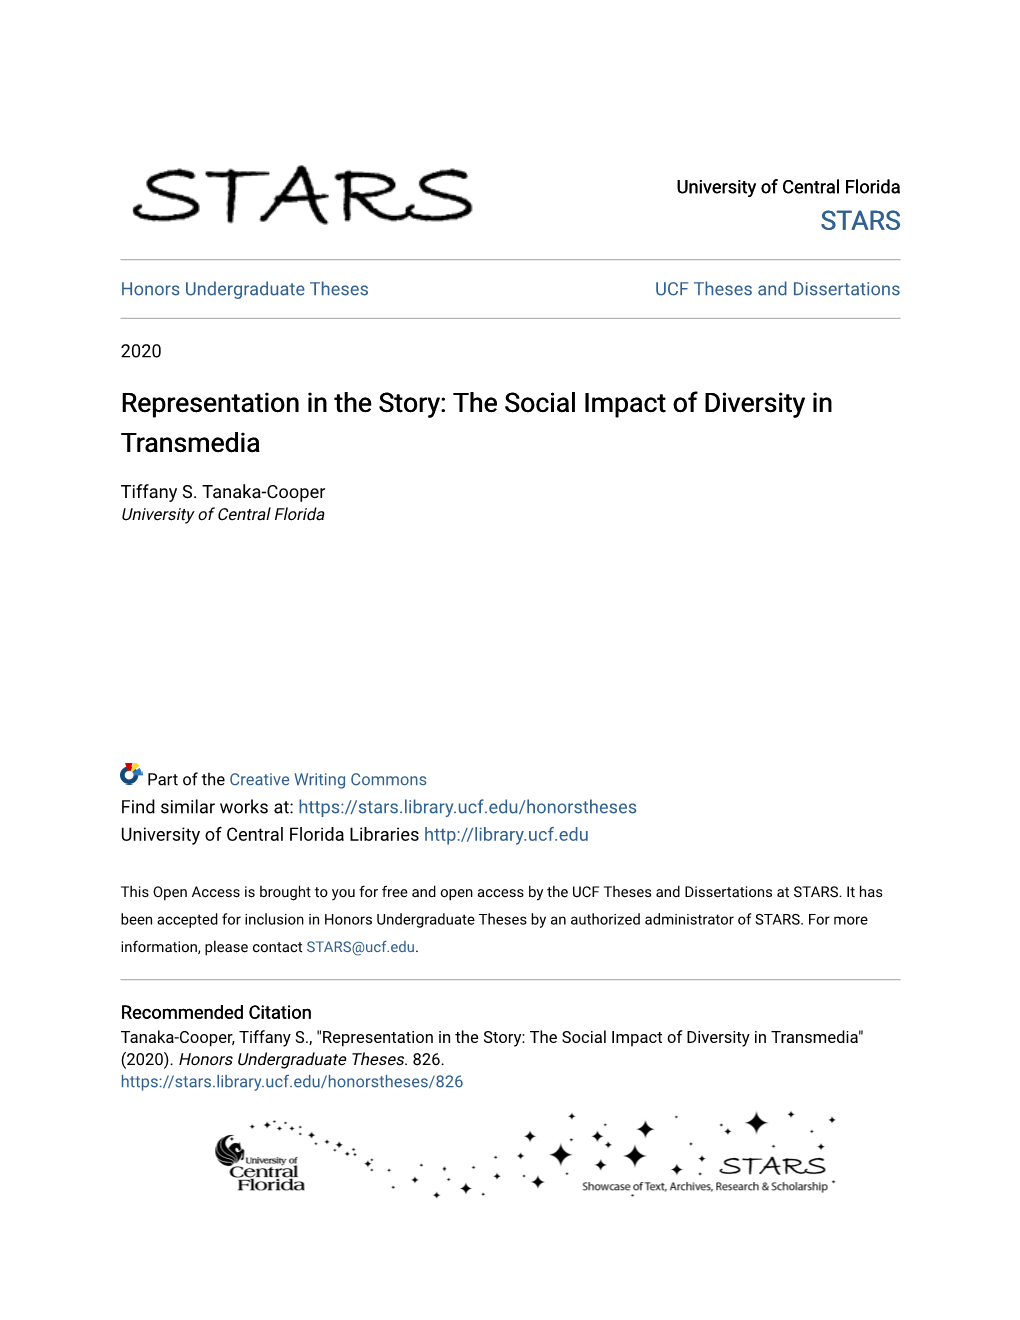 Representation in the Story: the Social Impact of Diversity in Transmedia